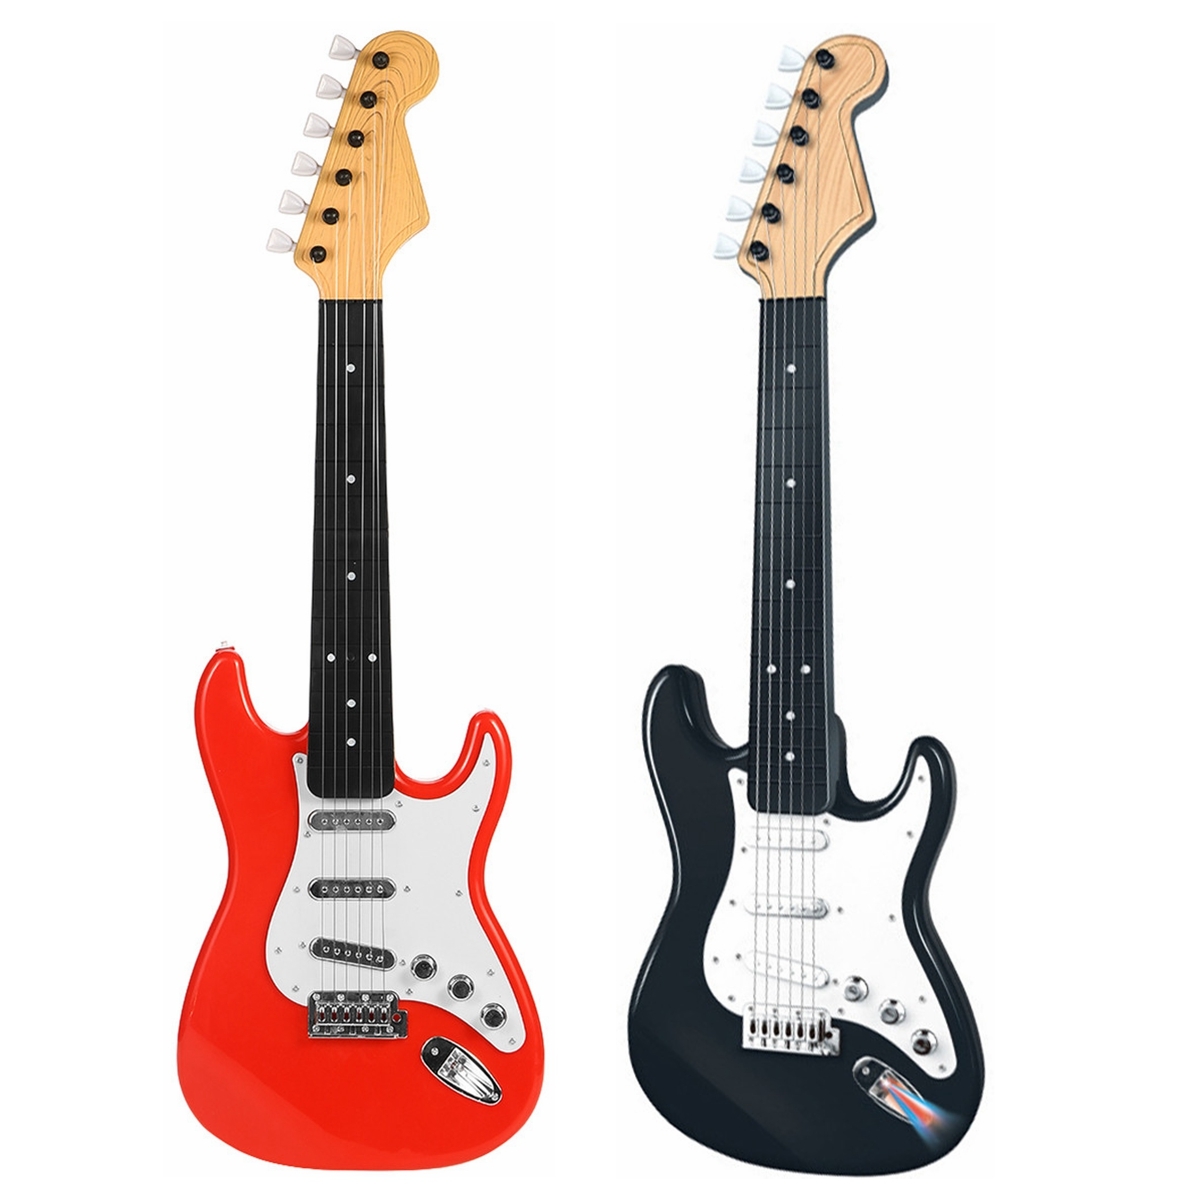 6 Strings Plastic Simulated Electric Guitar Musical Instrument Toy for Children